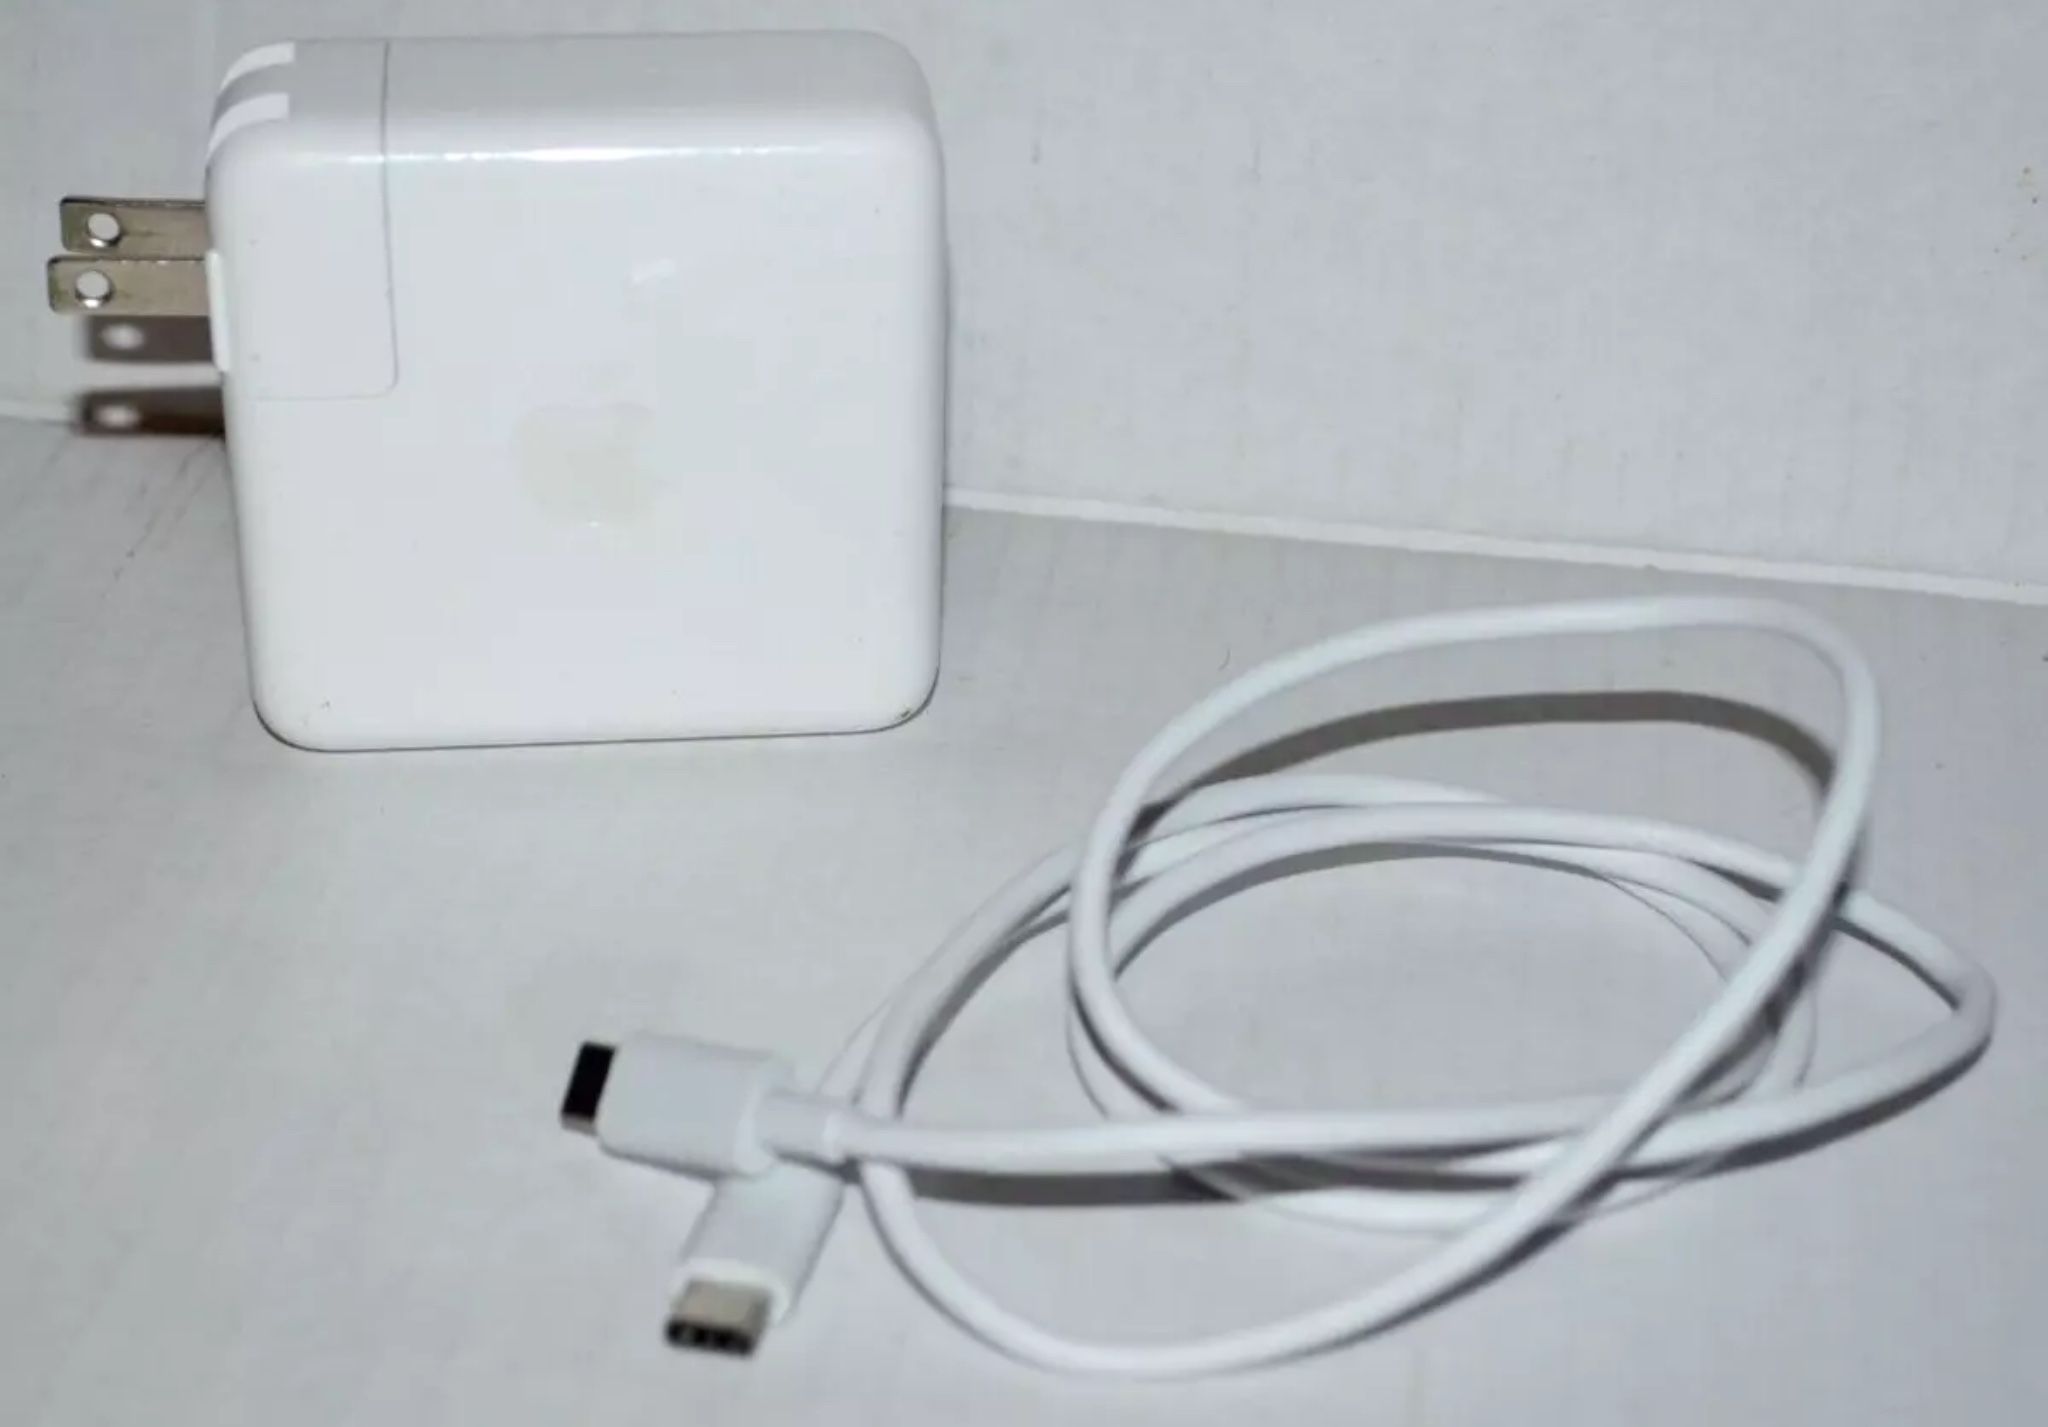 Original Apple Macbook Charger 61W USB-C Power Magsafe Adapter Charger 2016 And Up